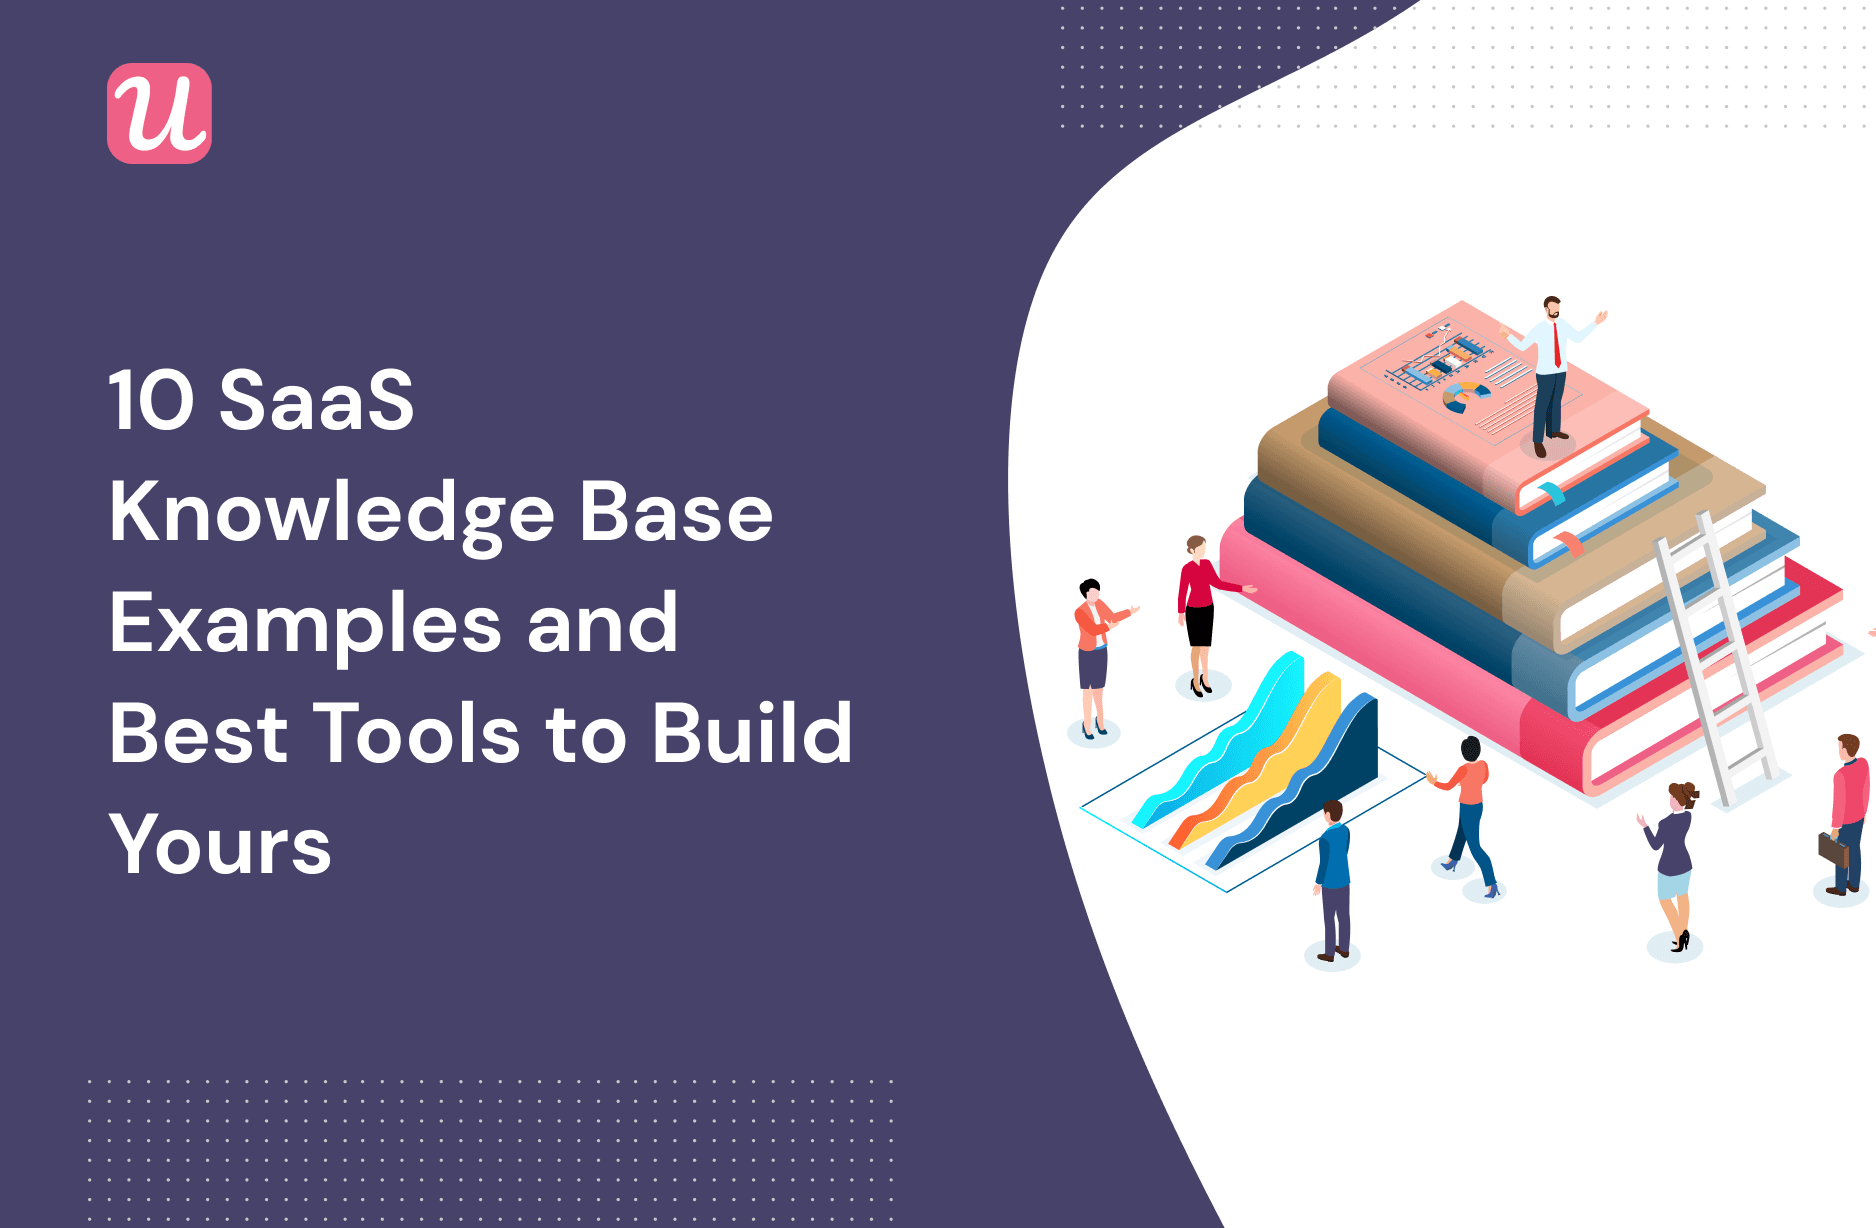 10 SaaS Knowledge Base Examples and Best Tools to Build Yours